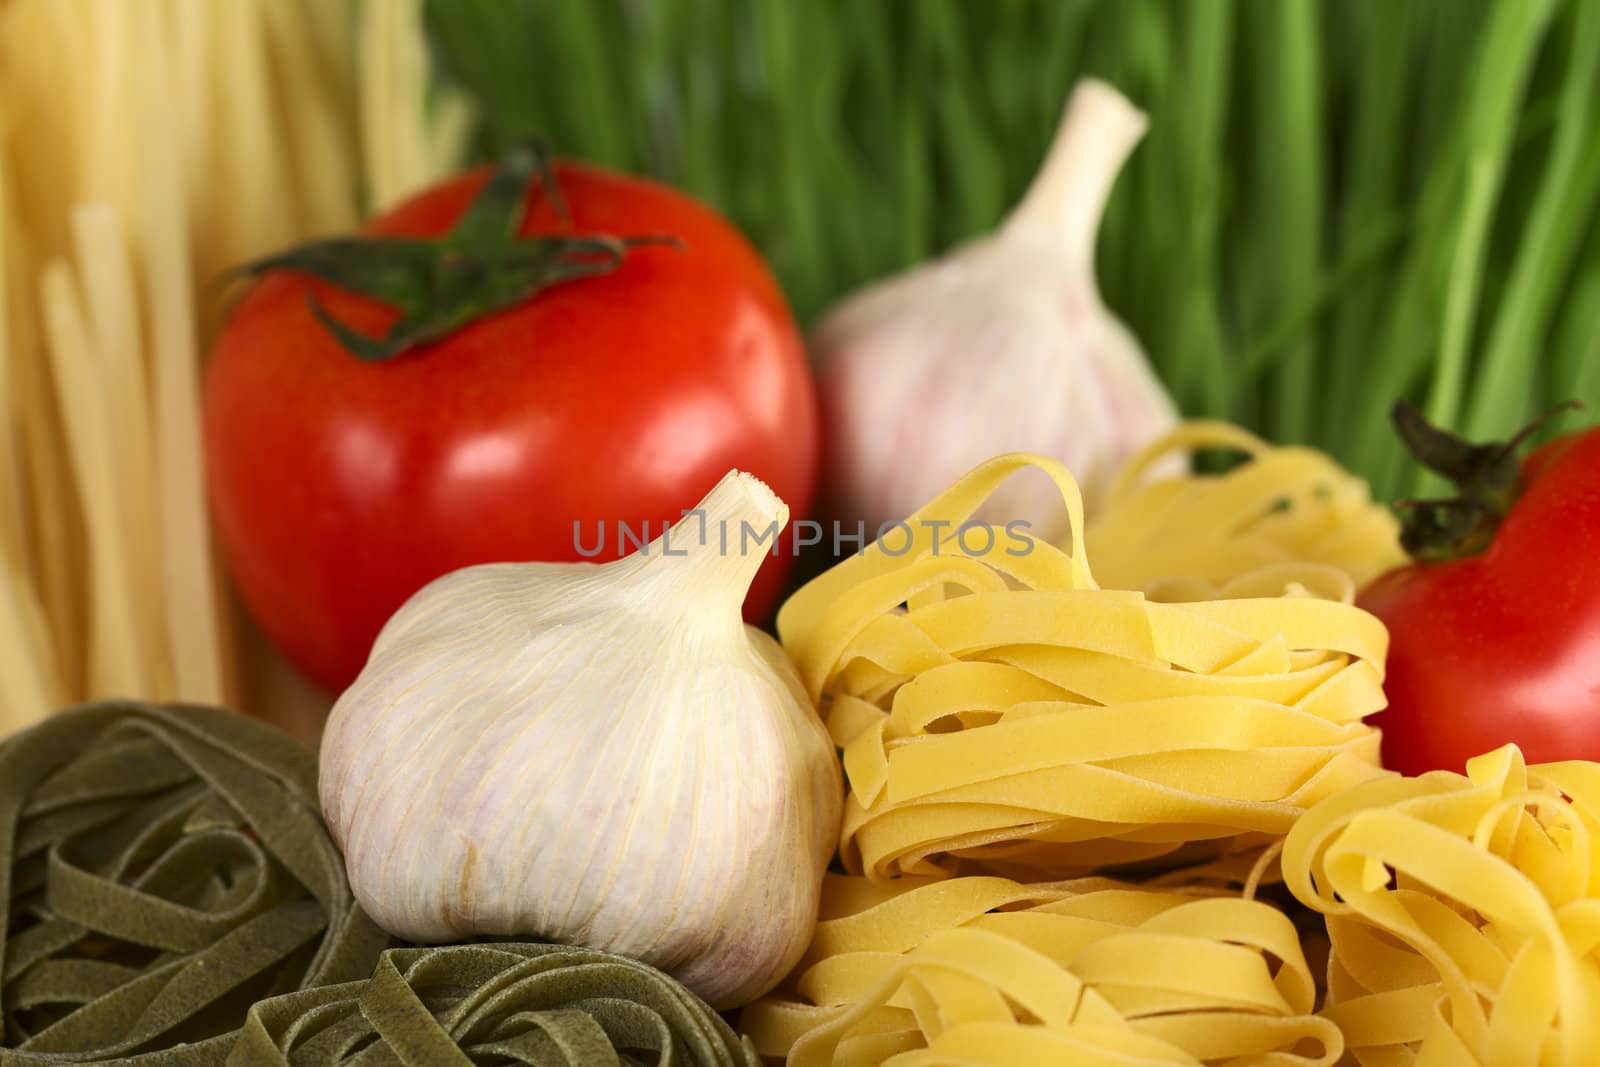 Raw tagliatelle paglia e fieno (straw and hay) with raw garlic bulb and globe tomato (Selective Focus, Focus on the front of the upper yellow tagliatelle pile and parts of the garlic bulb beside)